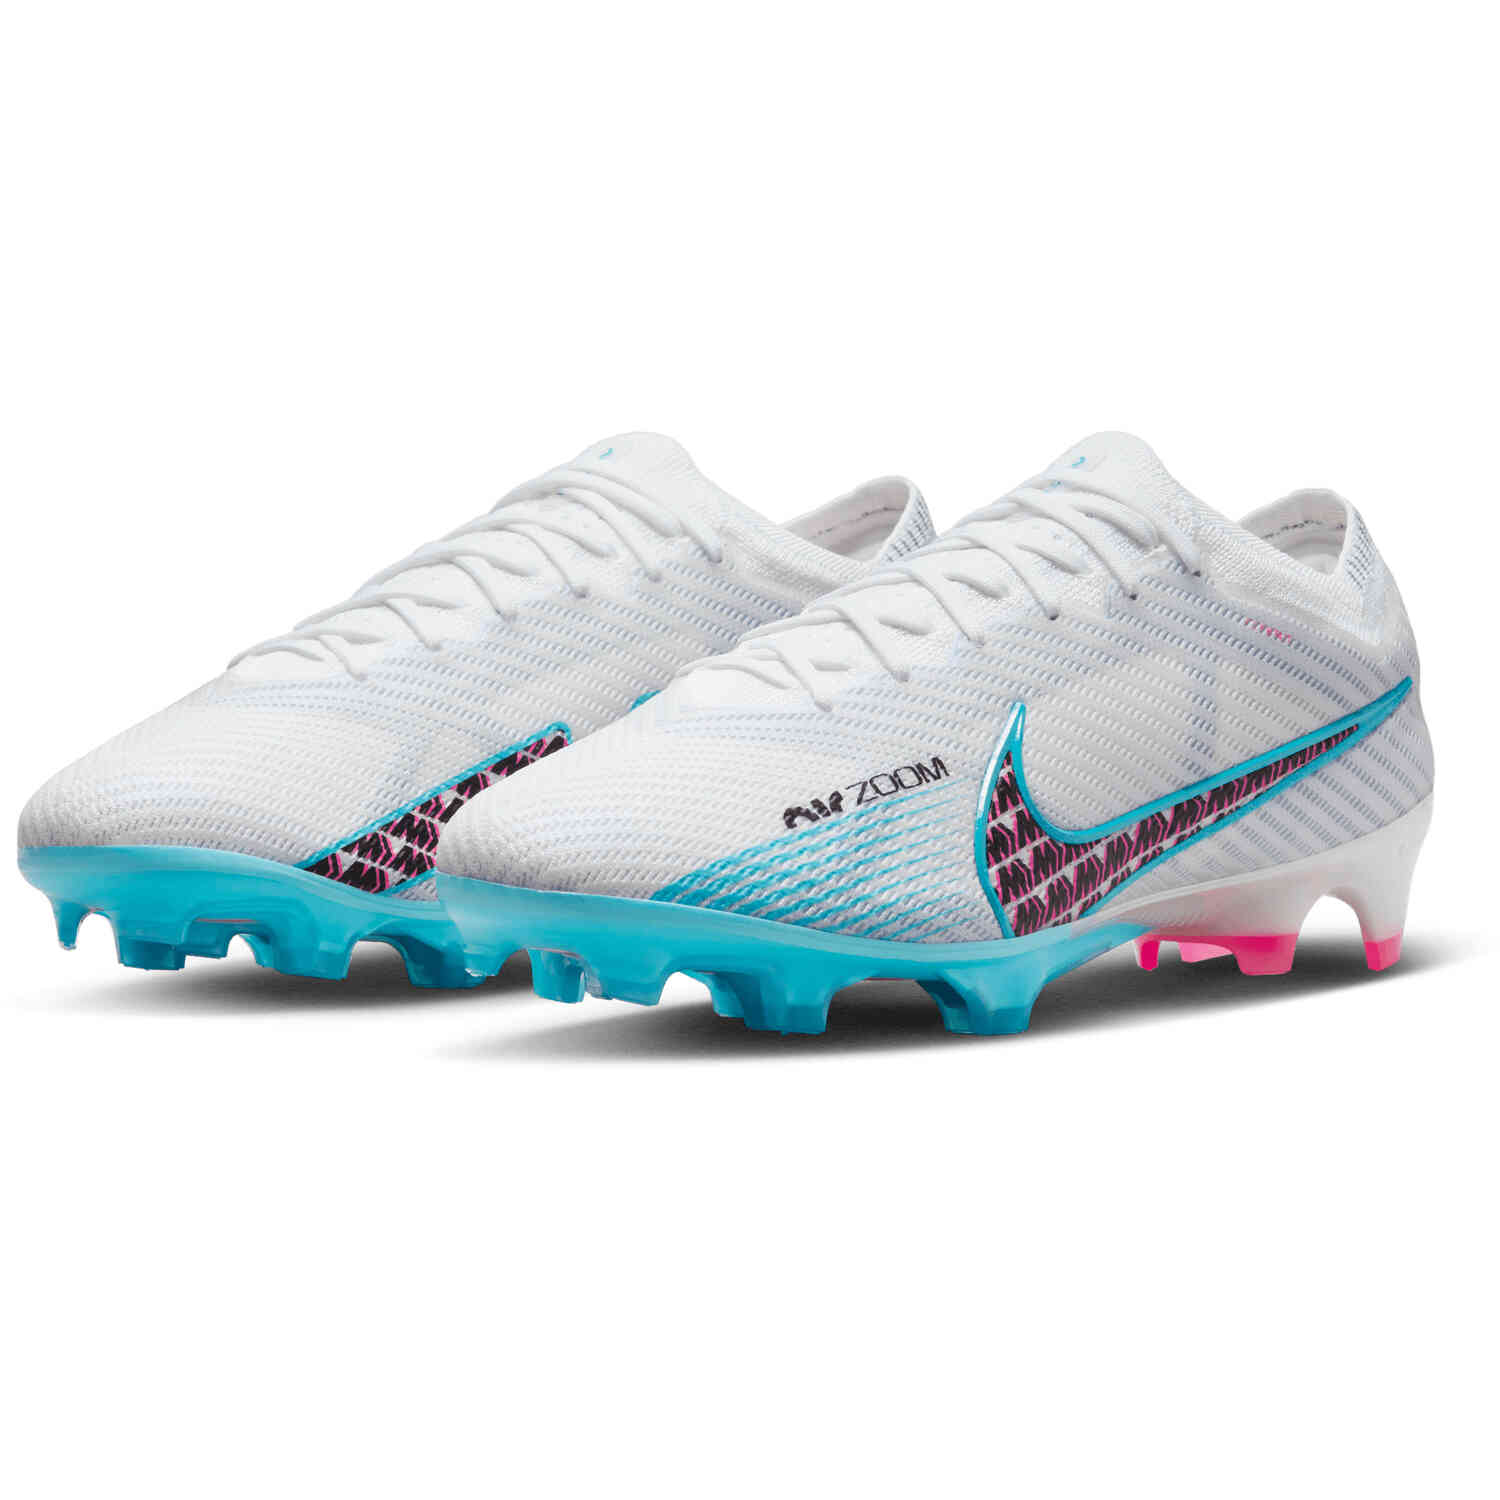 Score on the Field with Nike Pink and White Soccer Cleats